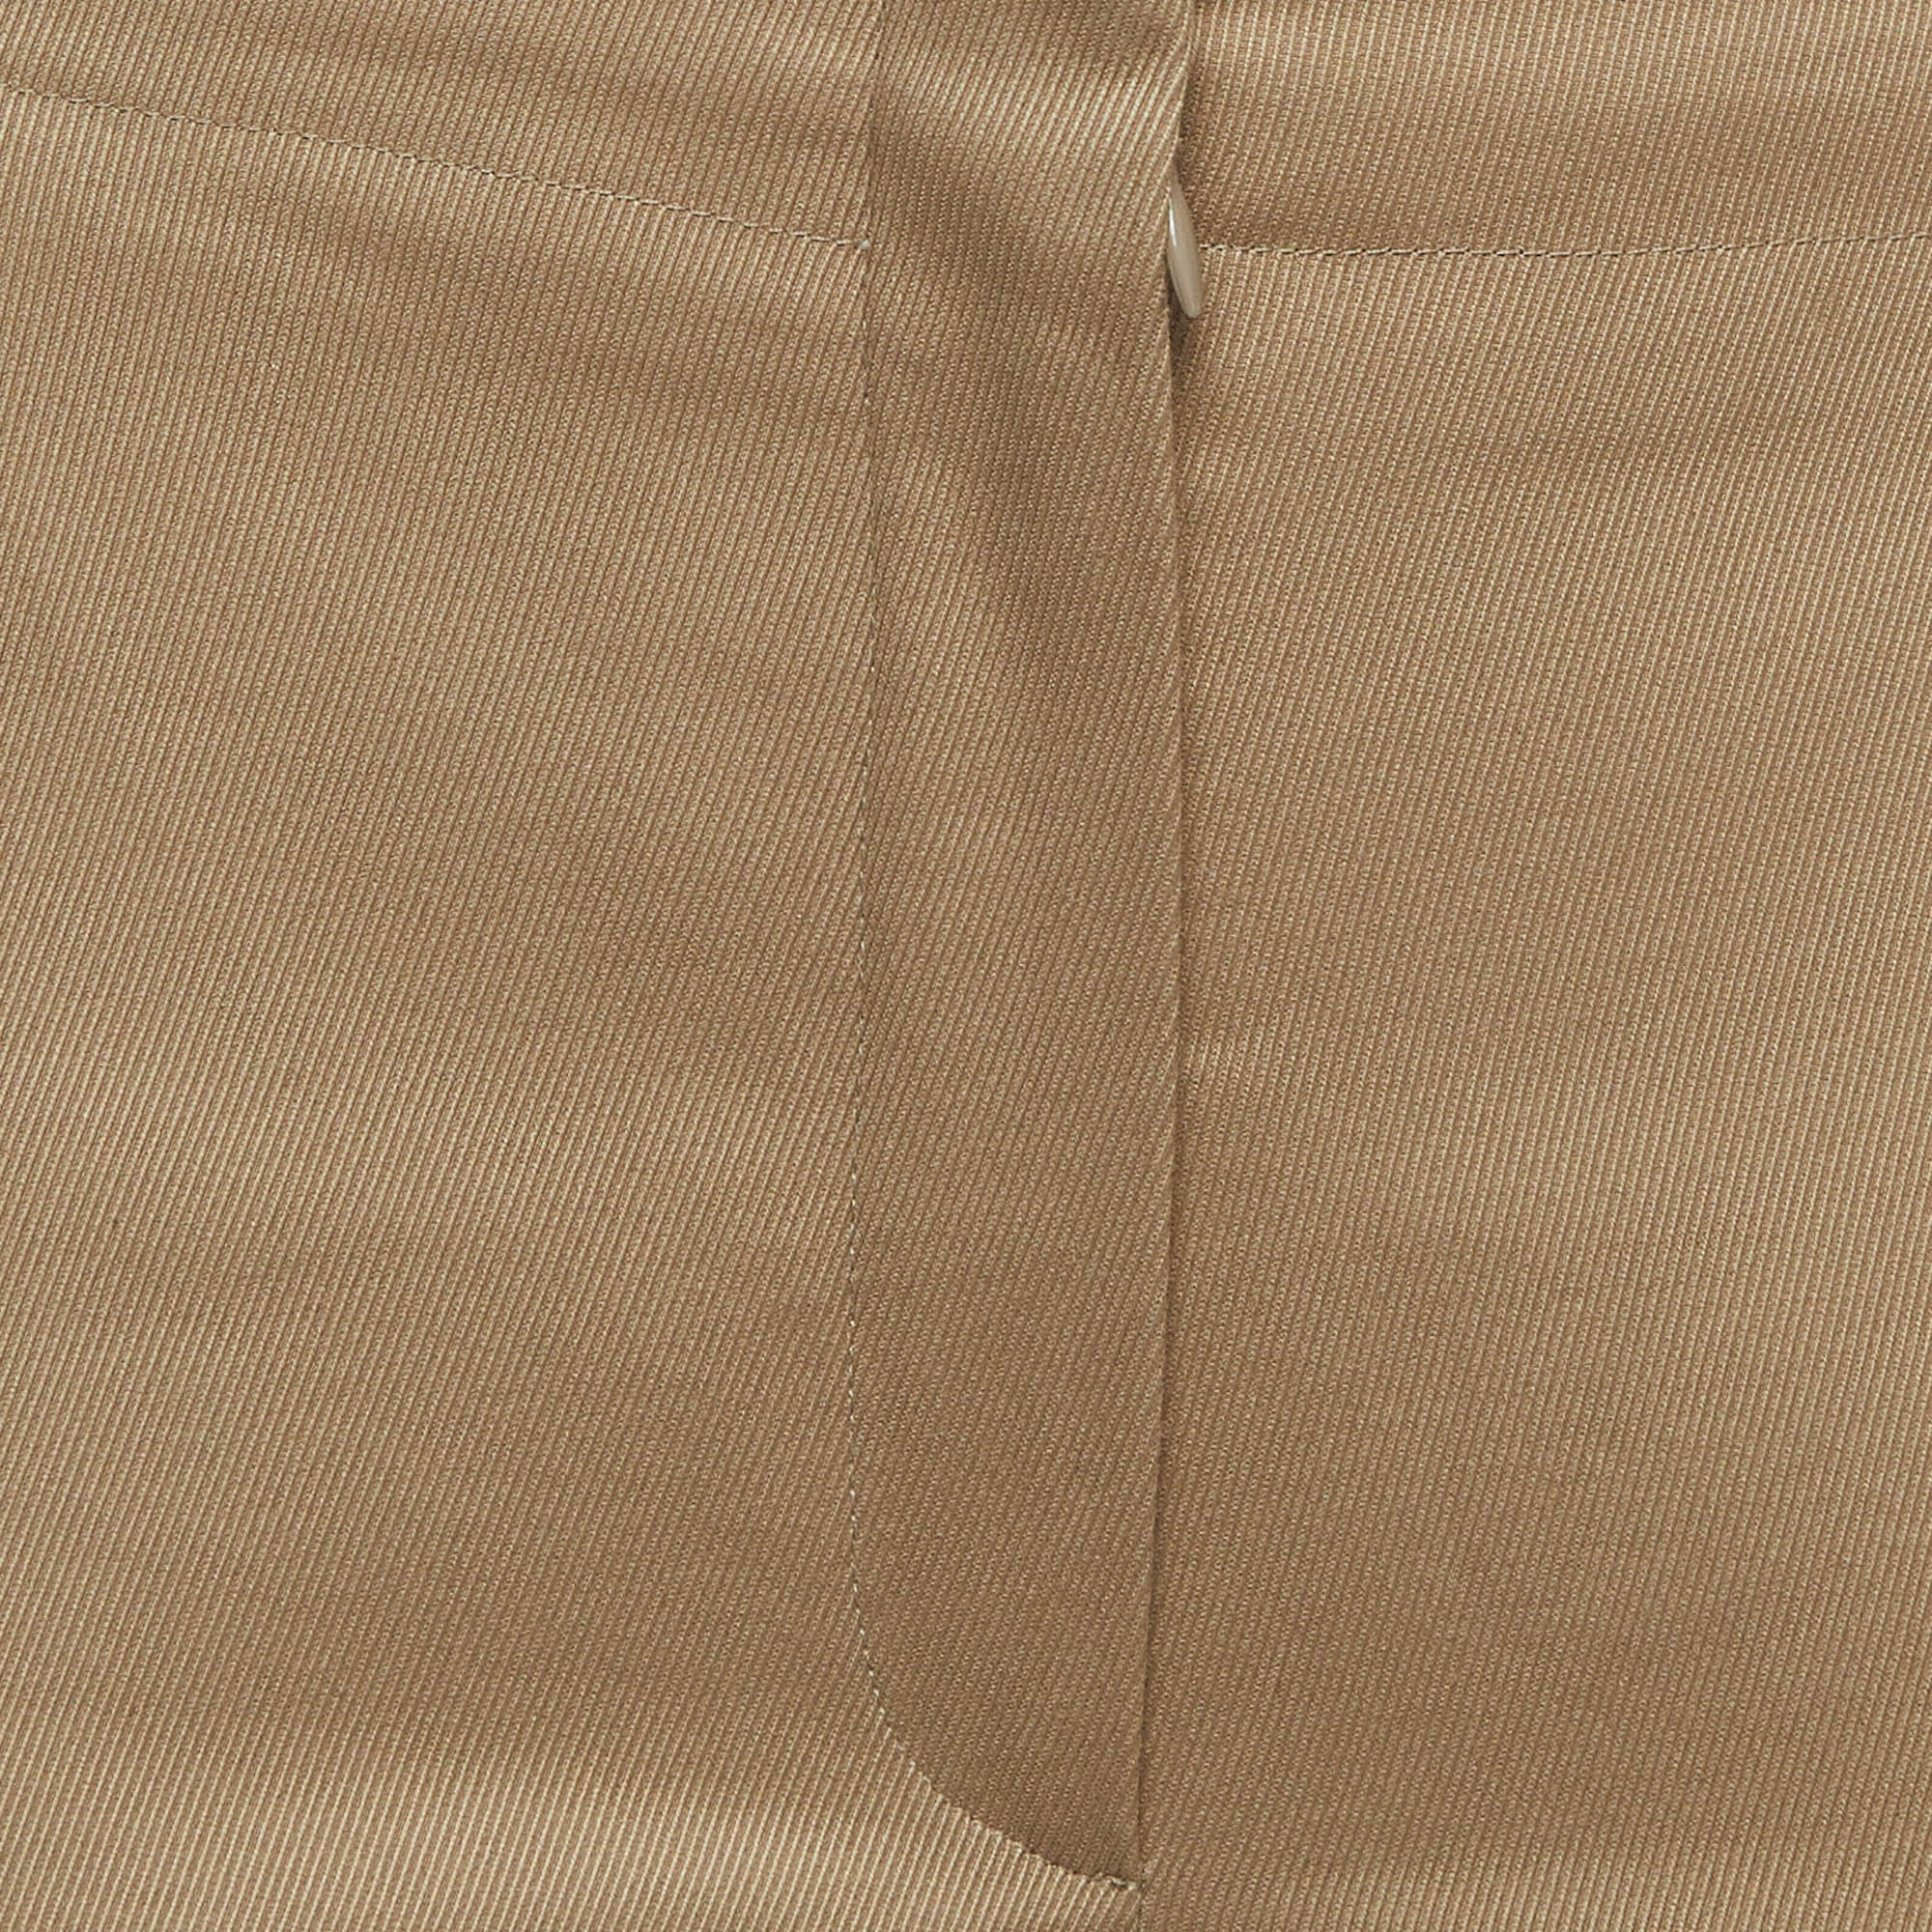 Dior Brown Cotton Twill Fitted Trousers S